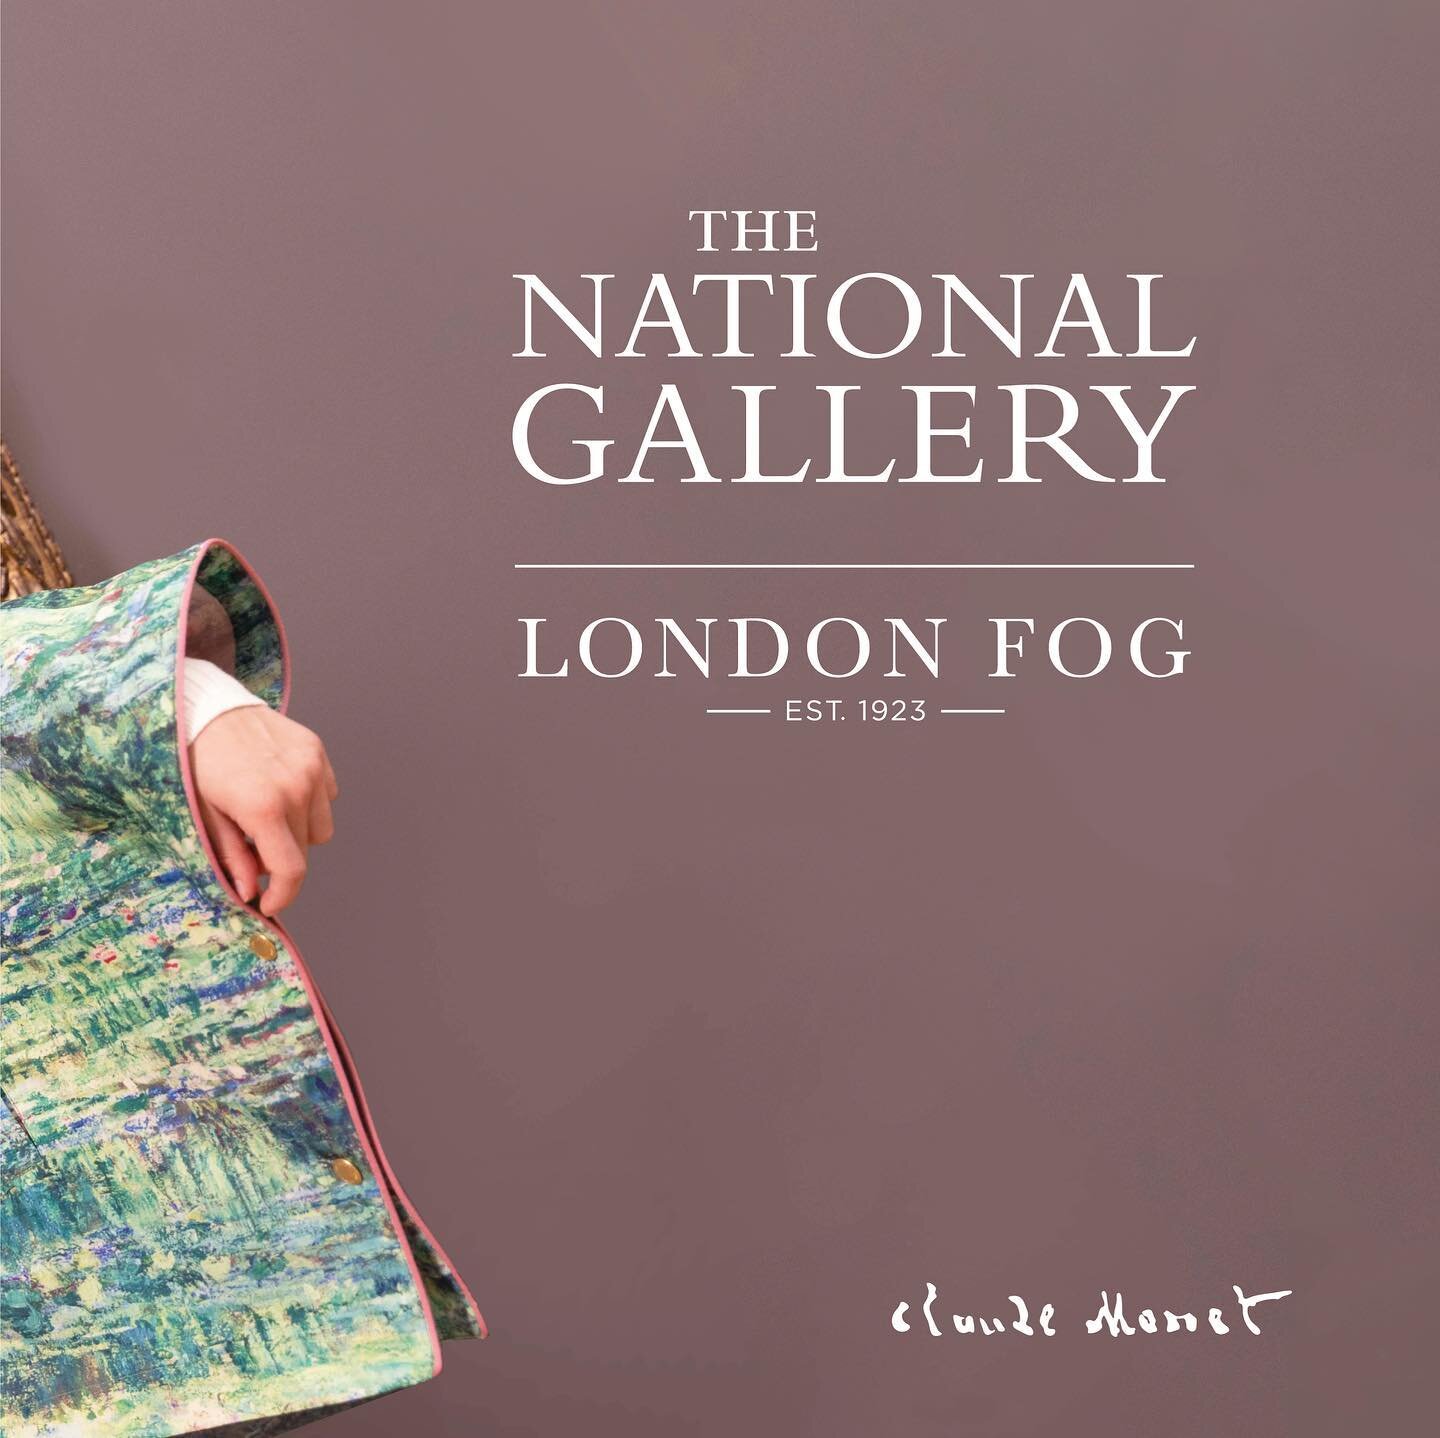 National Gallery X London Fog Collection
Fashionable outerwear inspired by famous French impressionist painter, Claude Monet
#LondonFog #NationalGalleryLondonFog